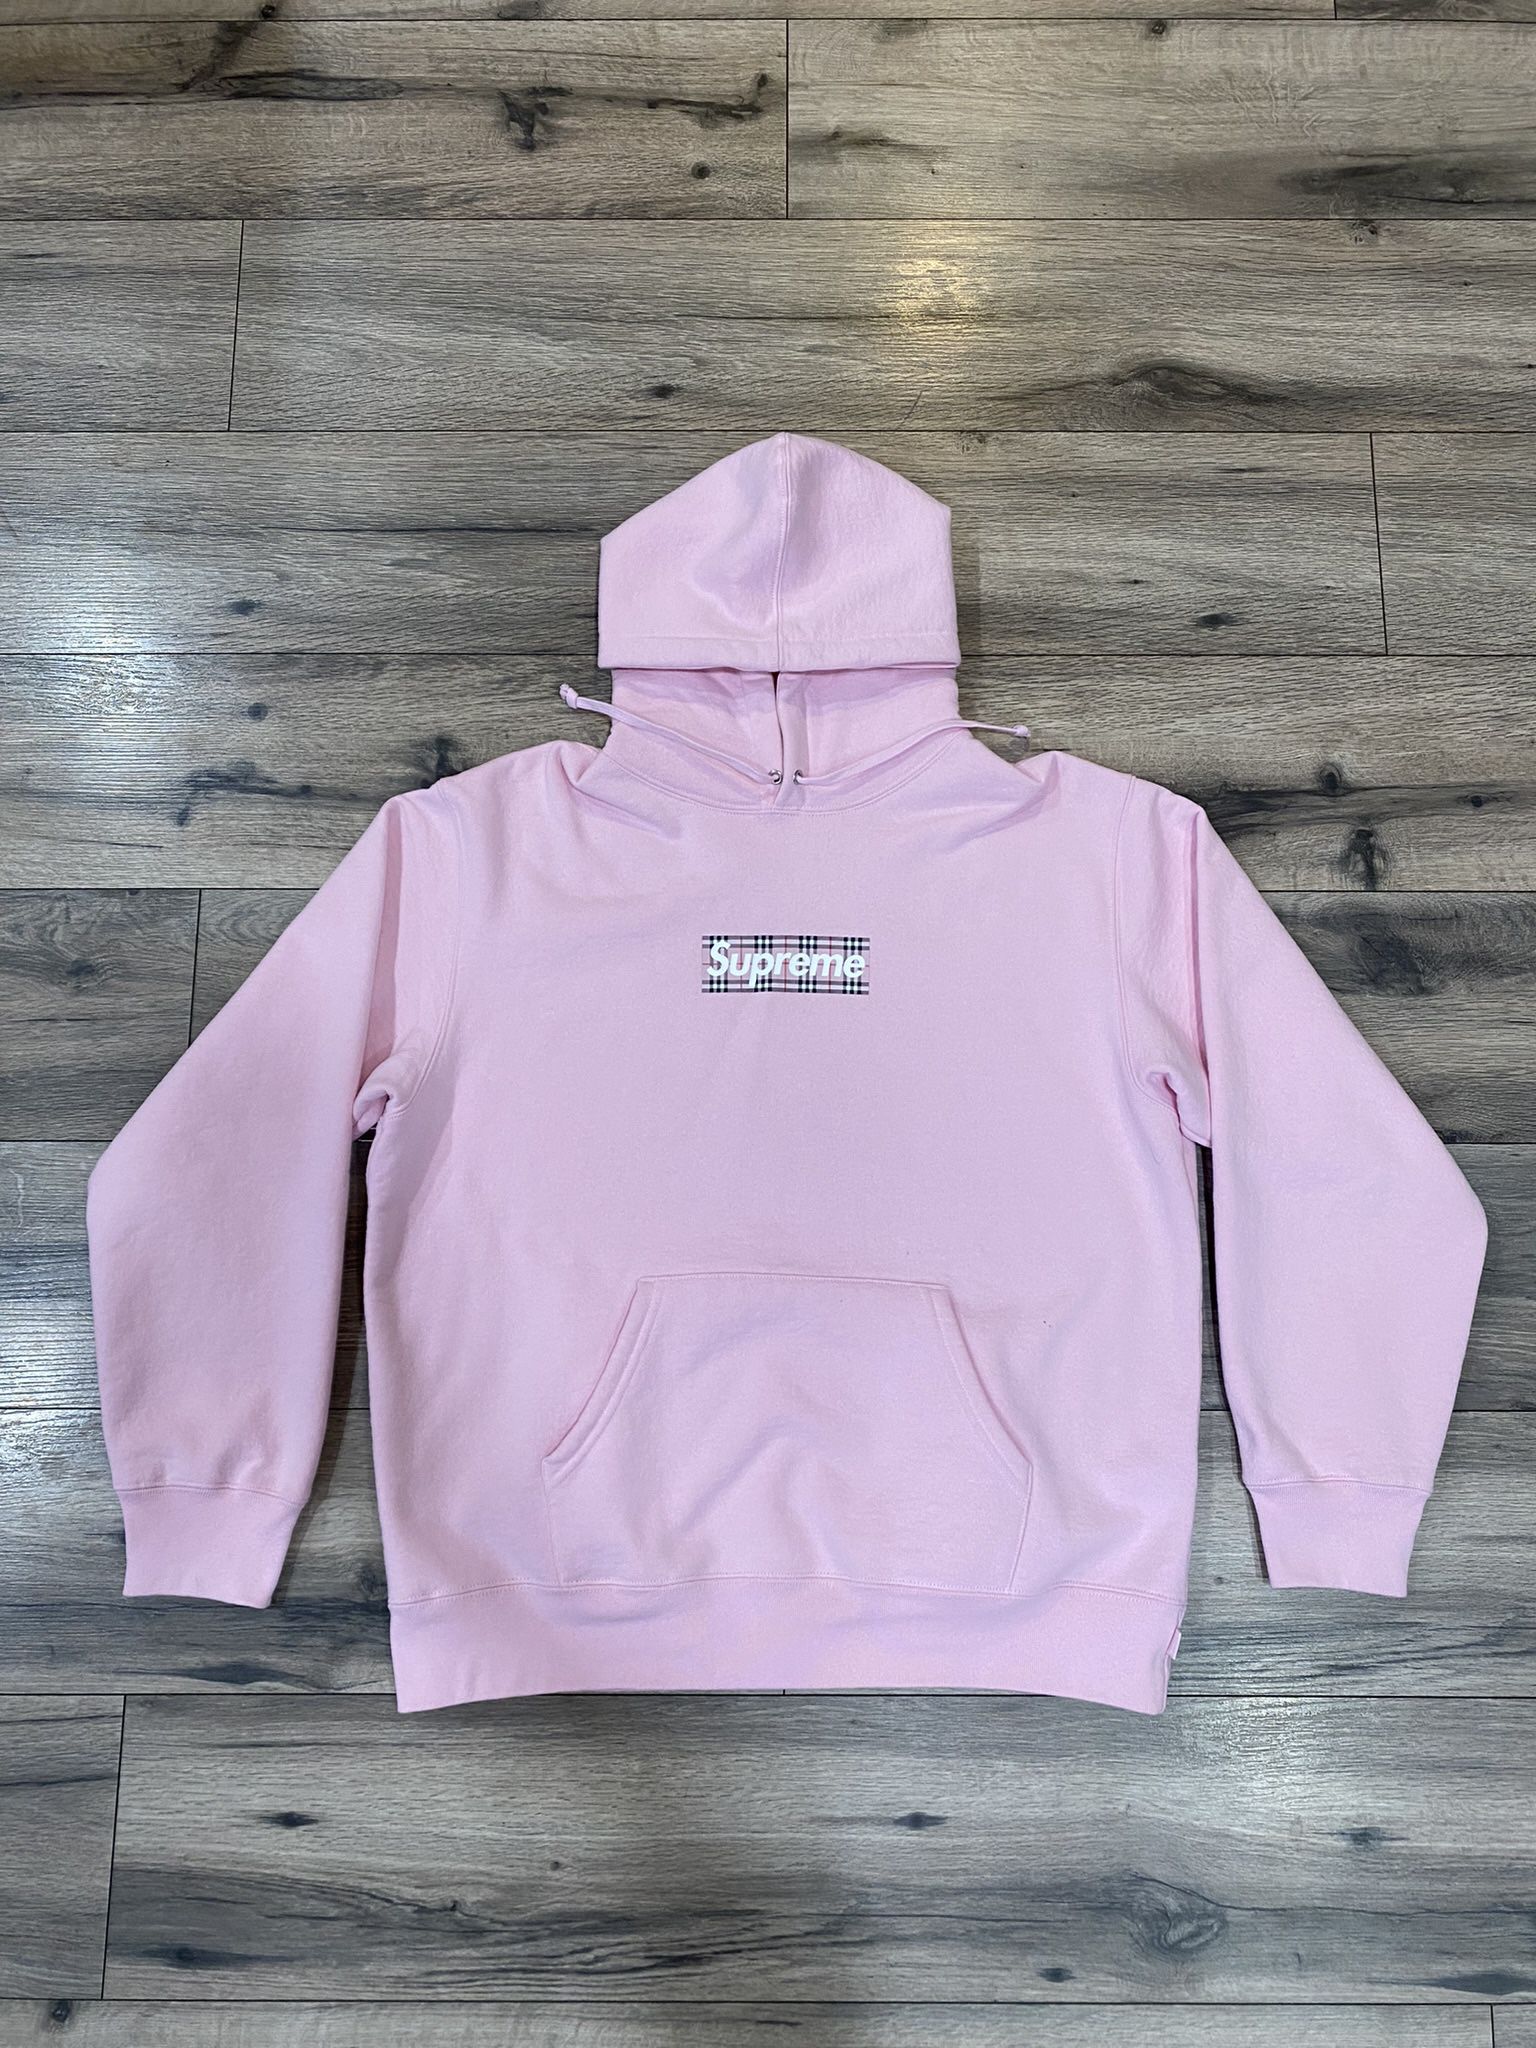 Supreme Burberry Box Logo Hoodie (Light Pink) for Sale in San Leandro, CA -  OfferUp